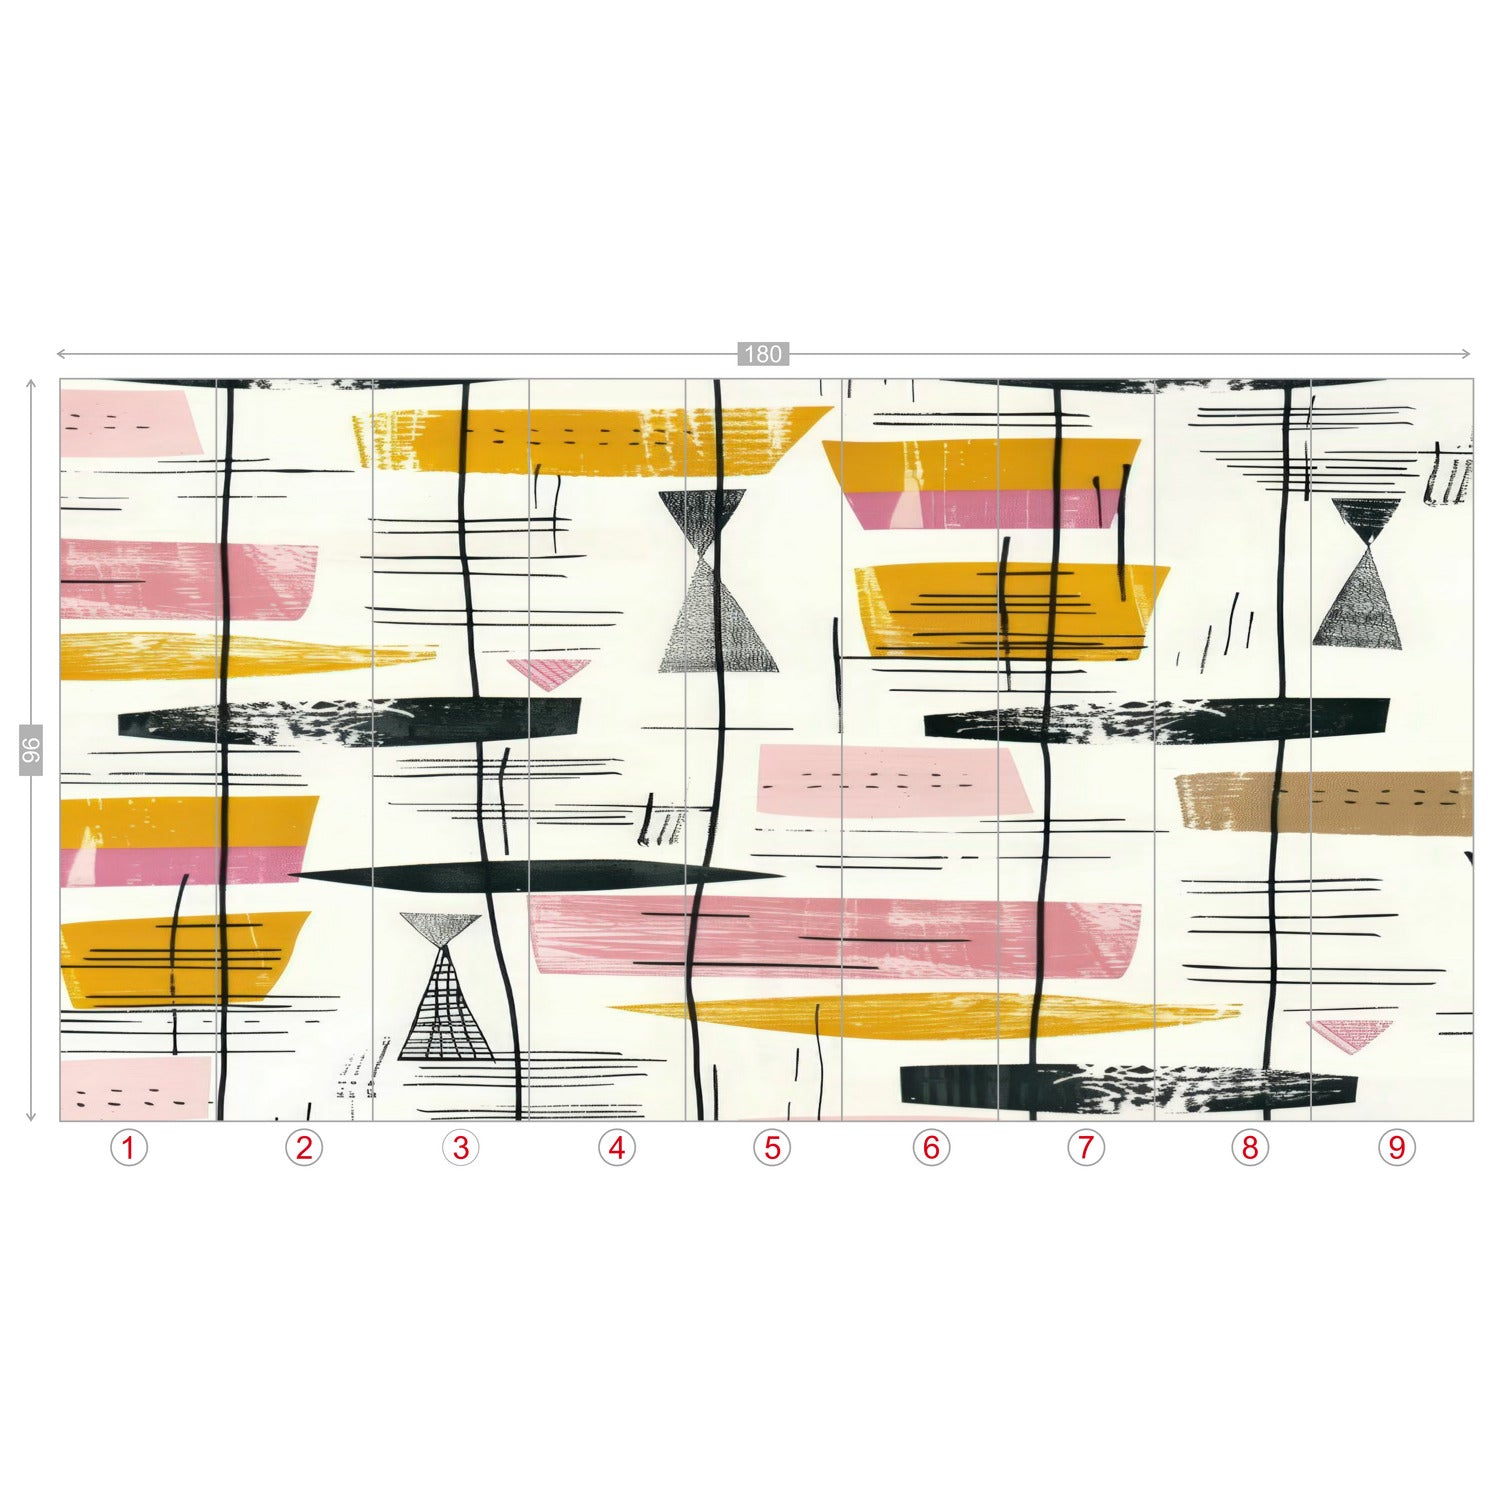 Kate McEnroe New York Retro Abstract Wall Mural, Mid Century Modern Peel And Stick Design, 1950s Style Home Decor, Geometric Mural Panels, Vintage Accent Wall ArtWall Mural118582